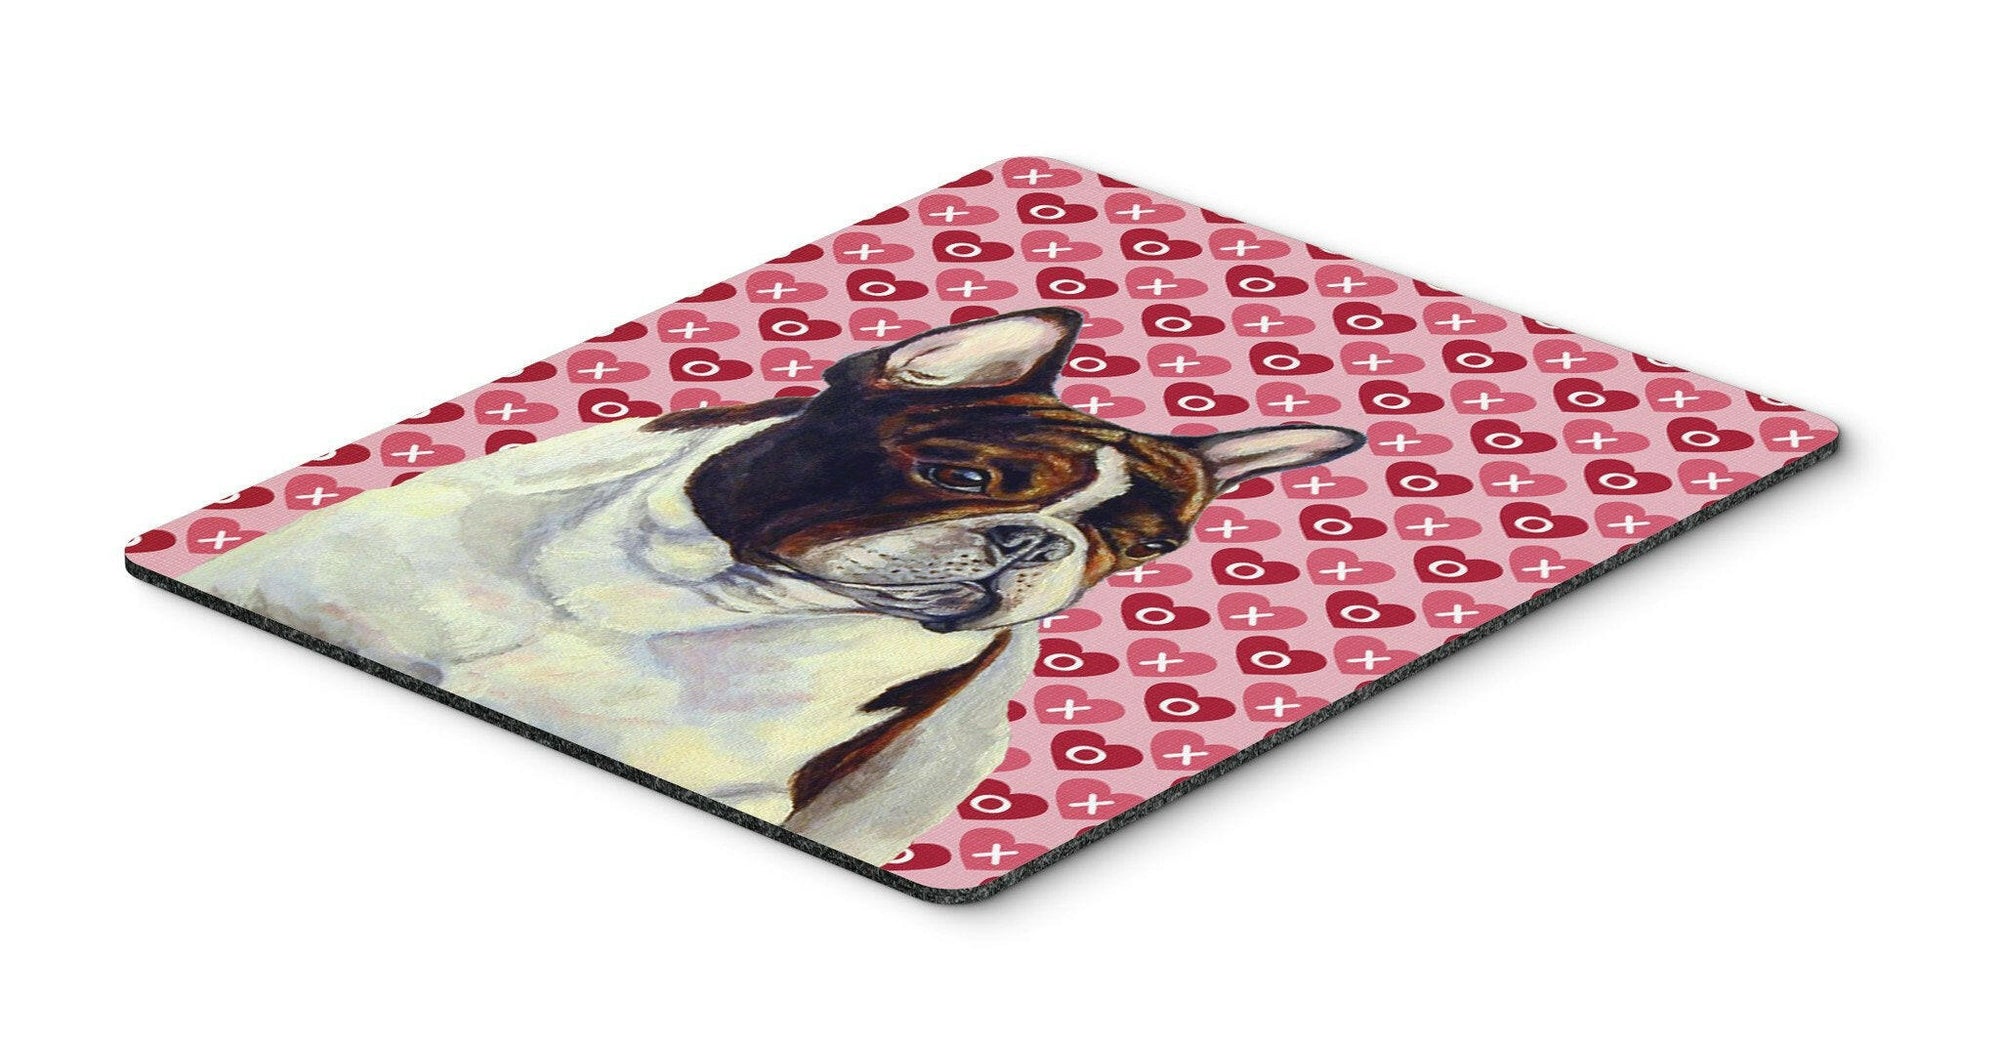 French Bulldog Hearts Love and Valentine's Day Mouse Pad, Hot Pad or Trivet by Caroline's Treasures